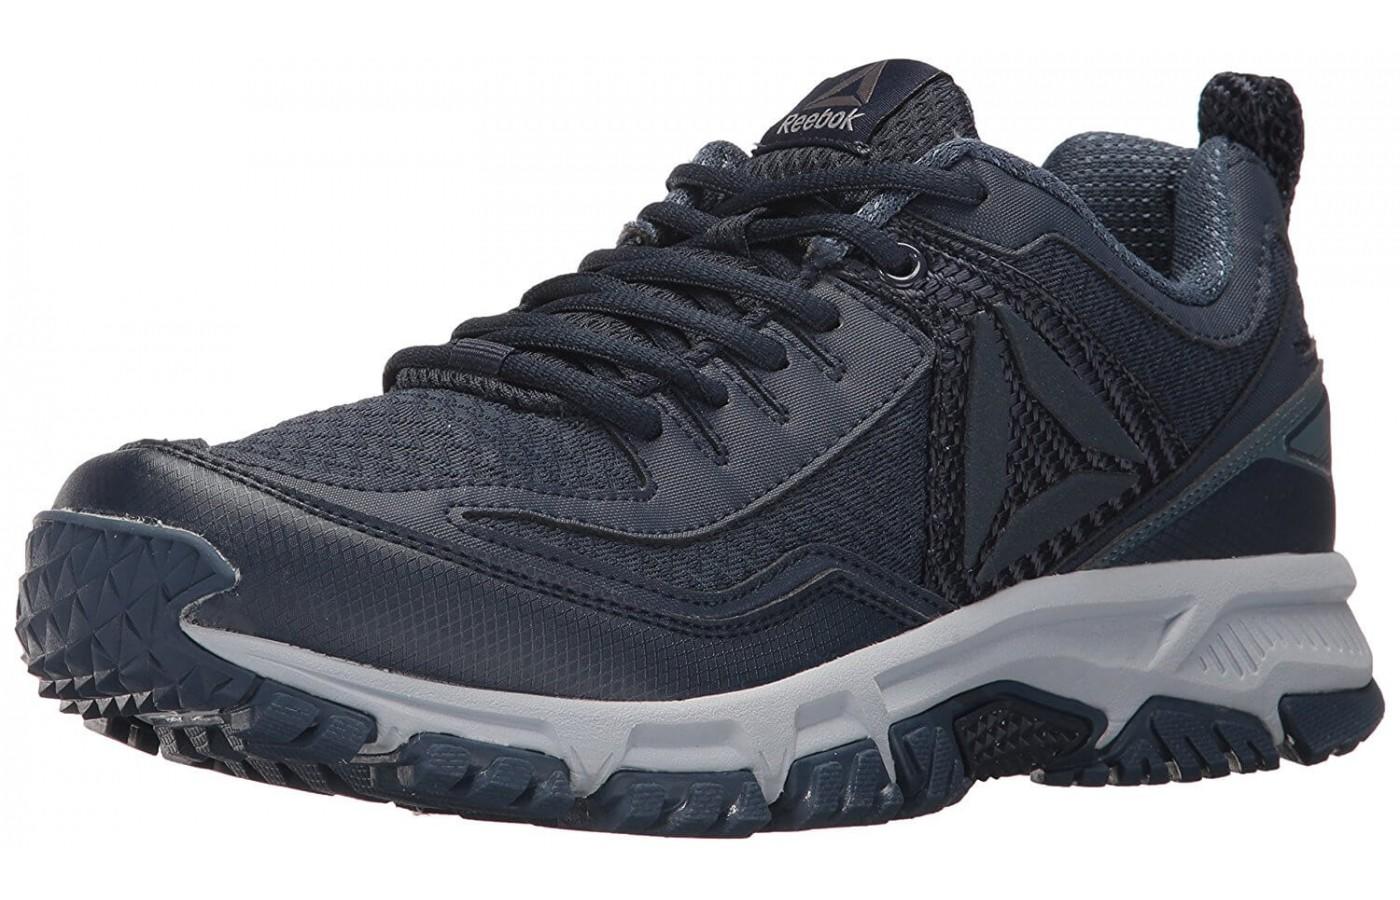 Reebok Ridgerider Trail 2.0 is a trail shoe with prominent outsole lugs